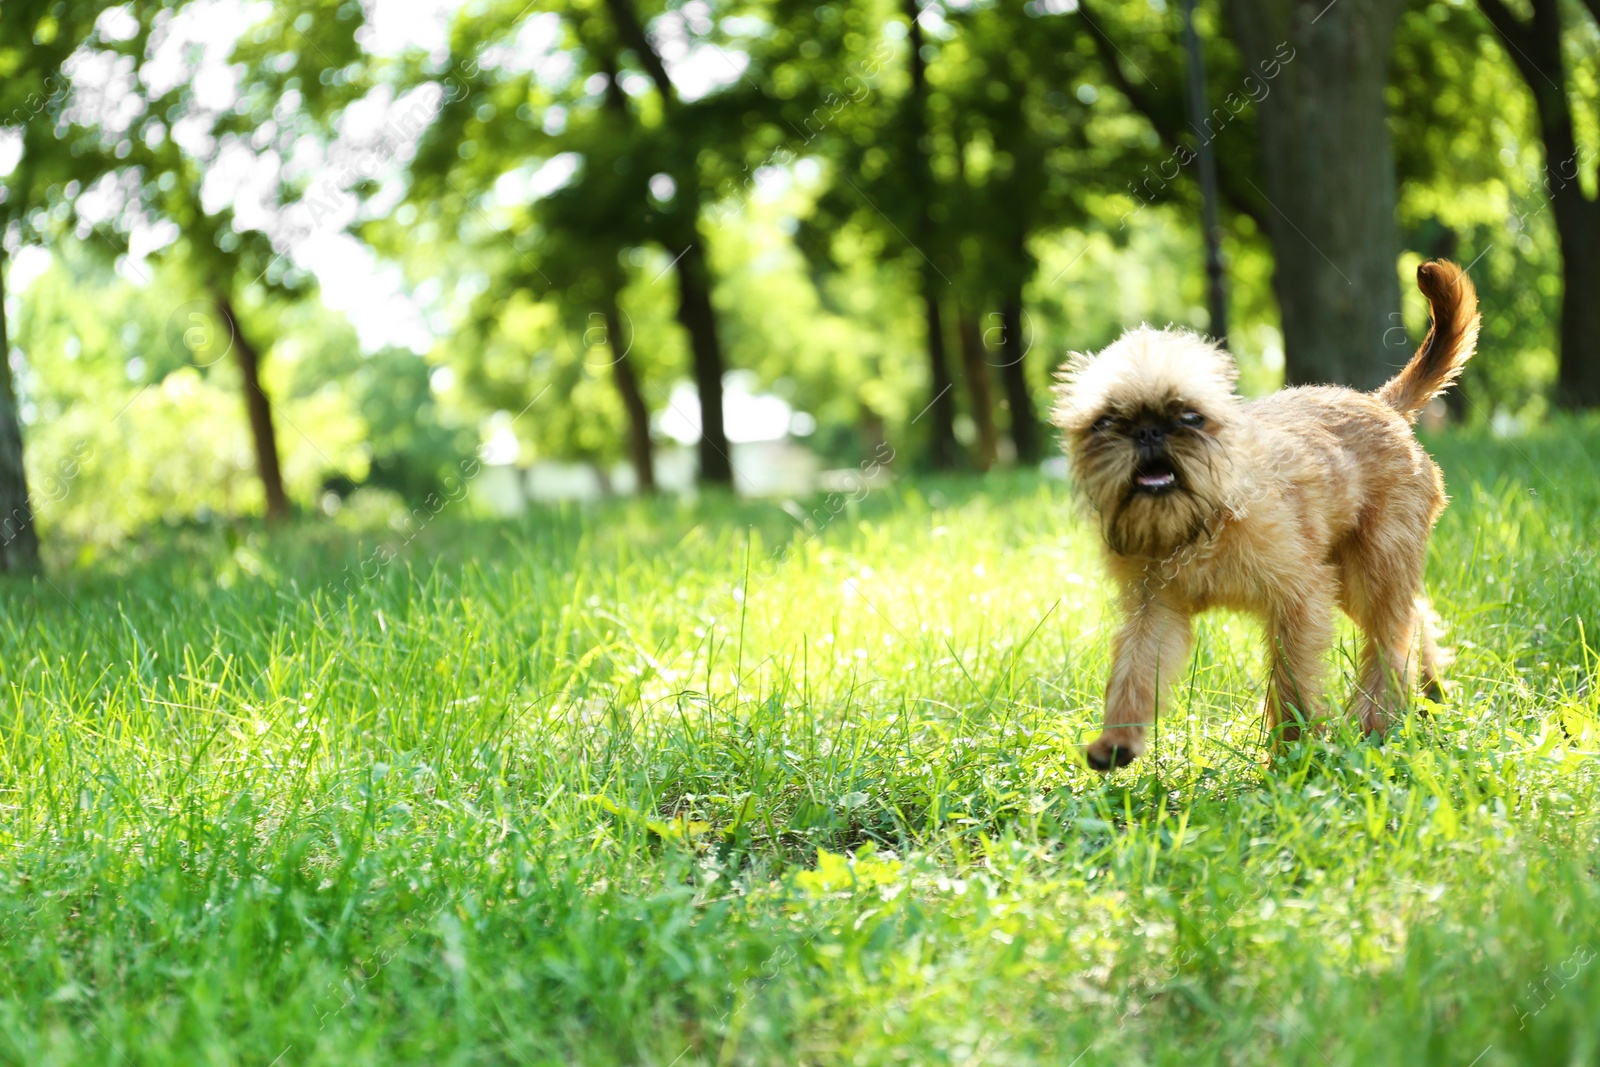 Photo of Cute fluffy dog on green grass in park. Space for text